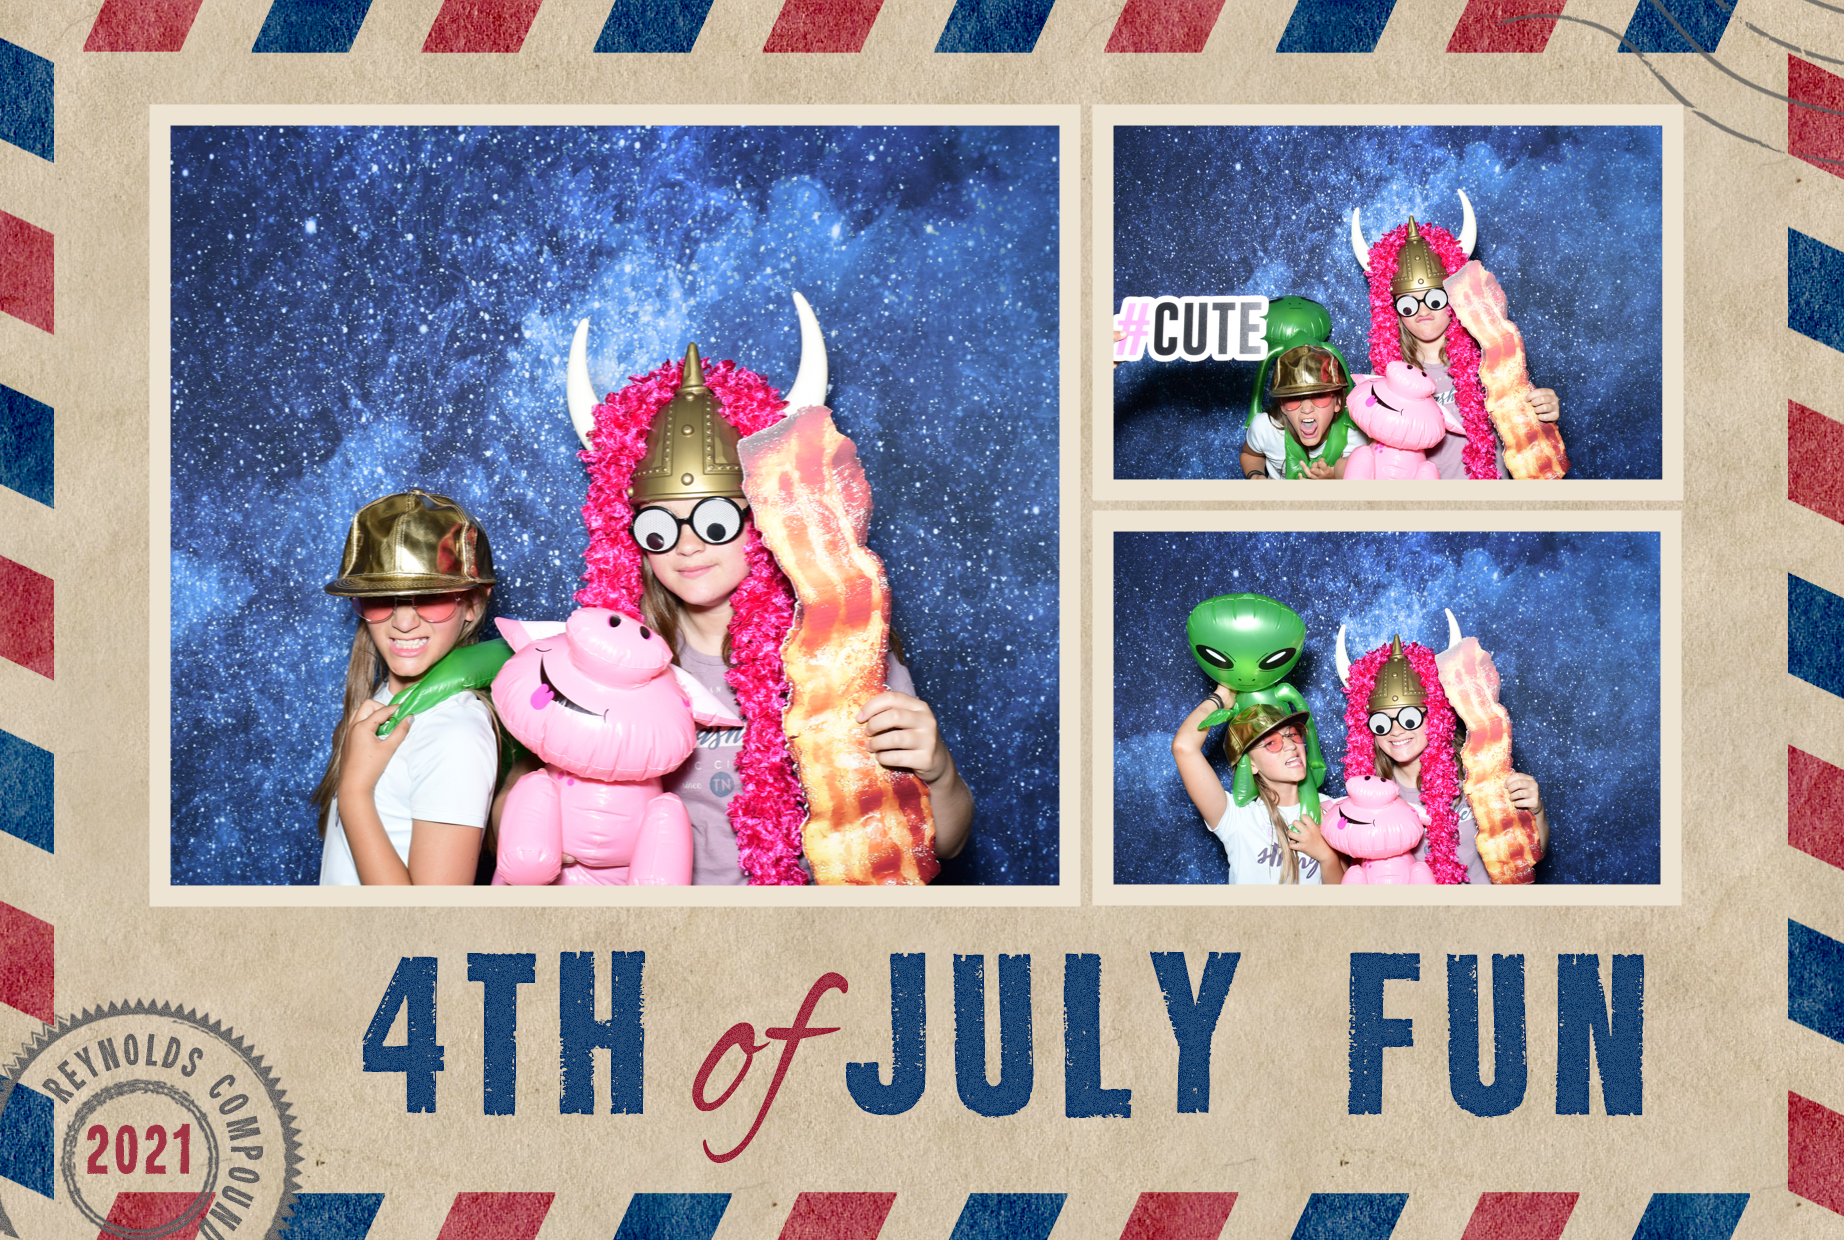 Sample photo from a family fourth of july event